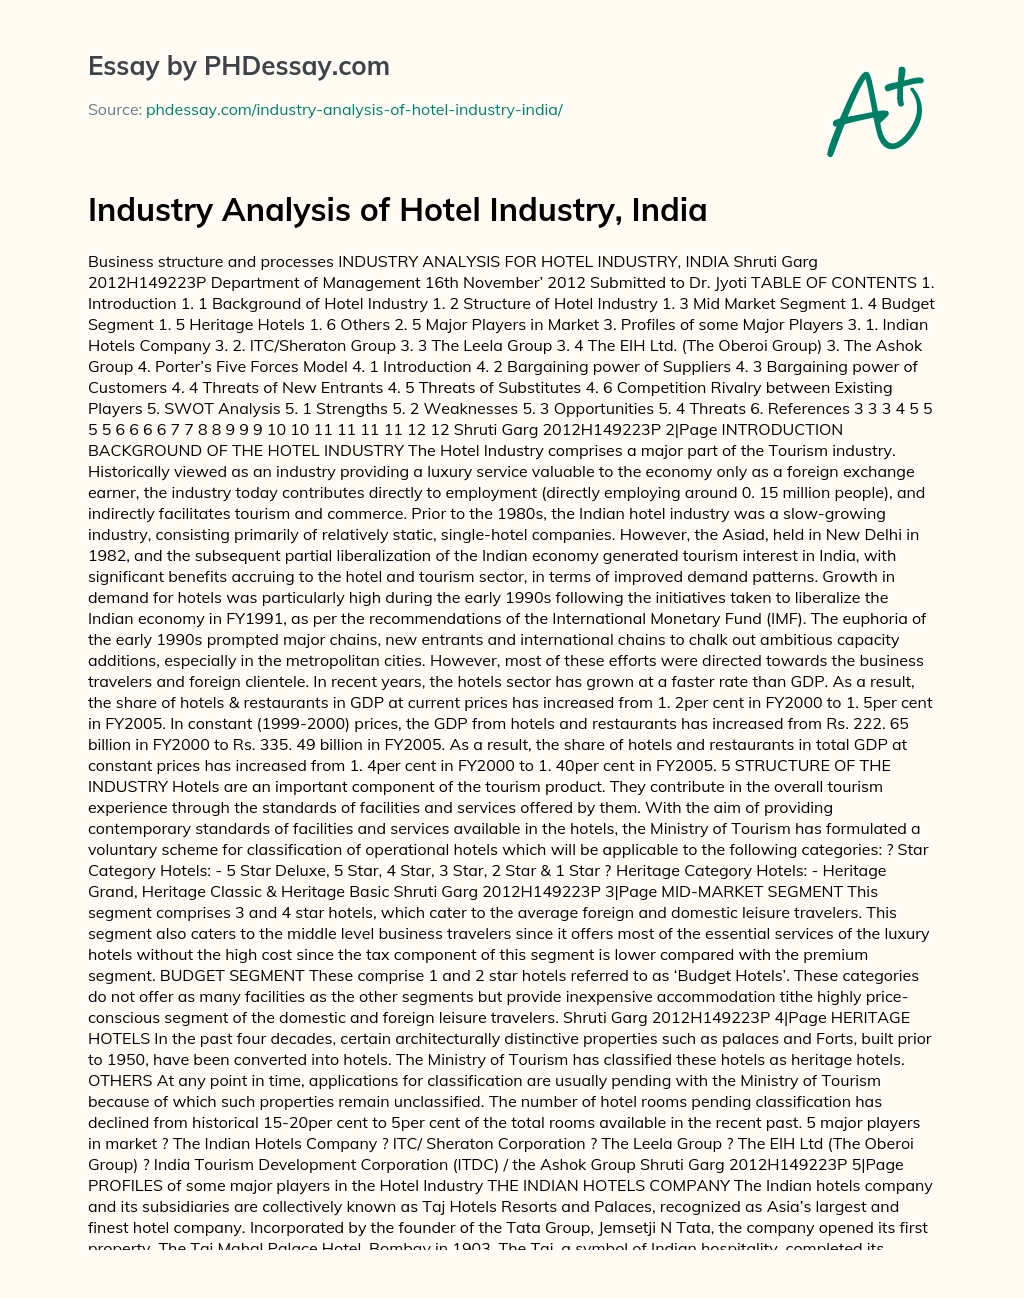 Industry Analysis of Hotel Industry, India essay